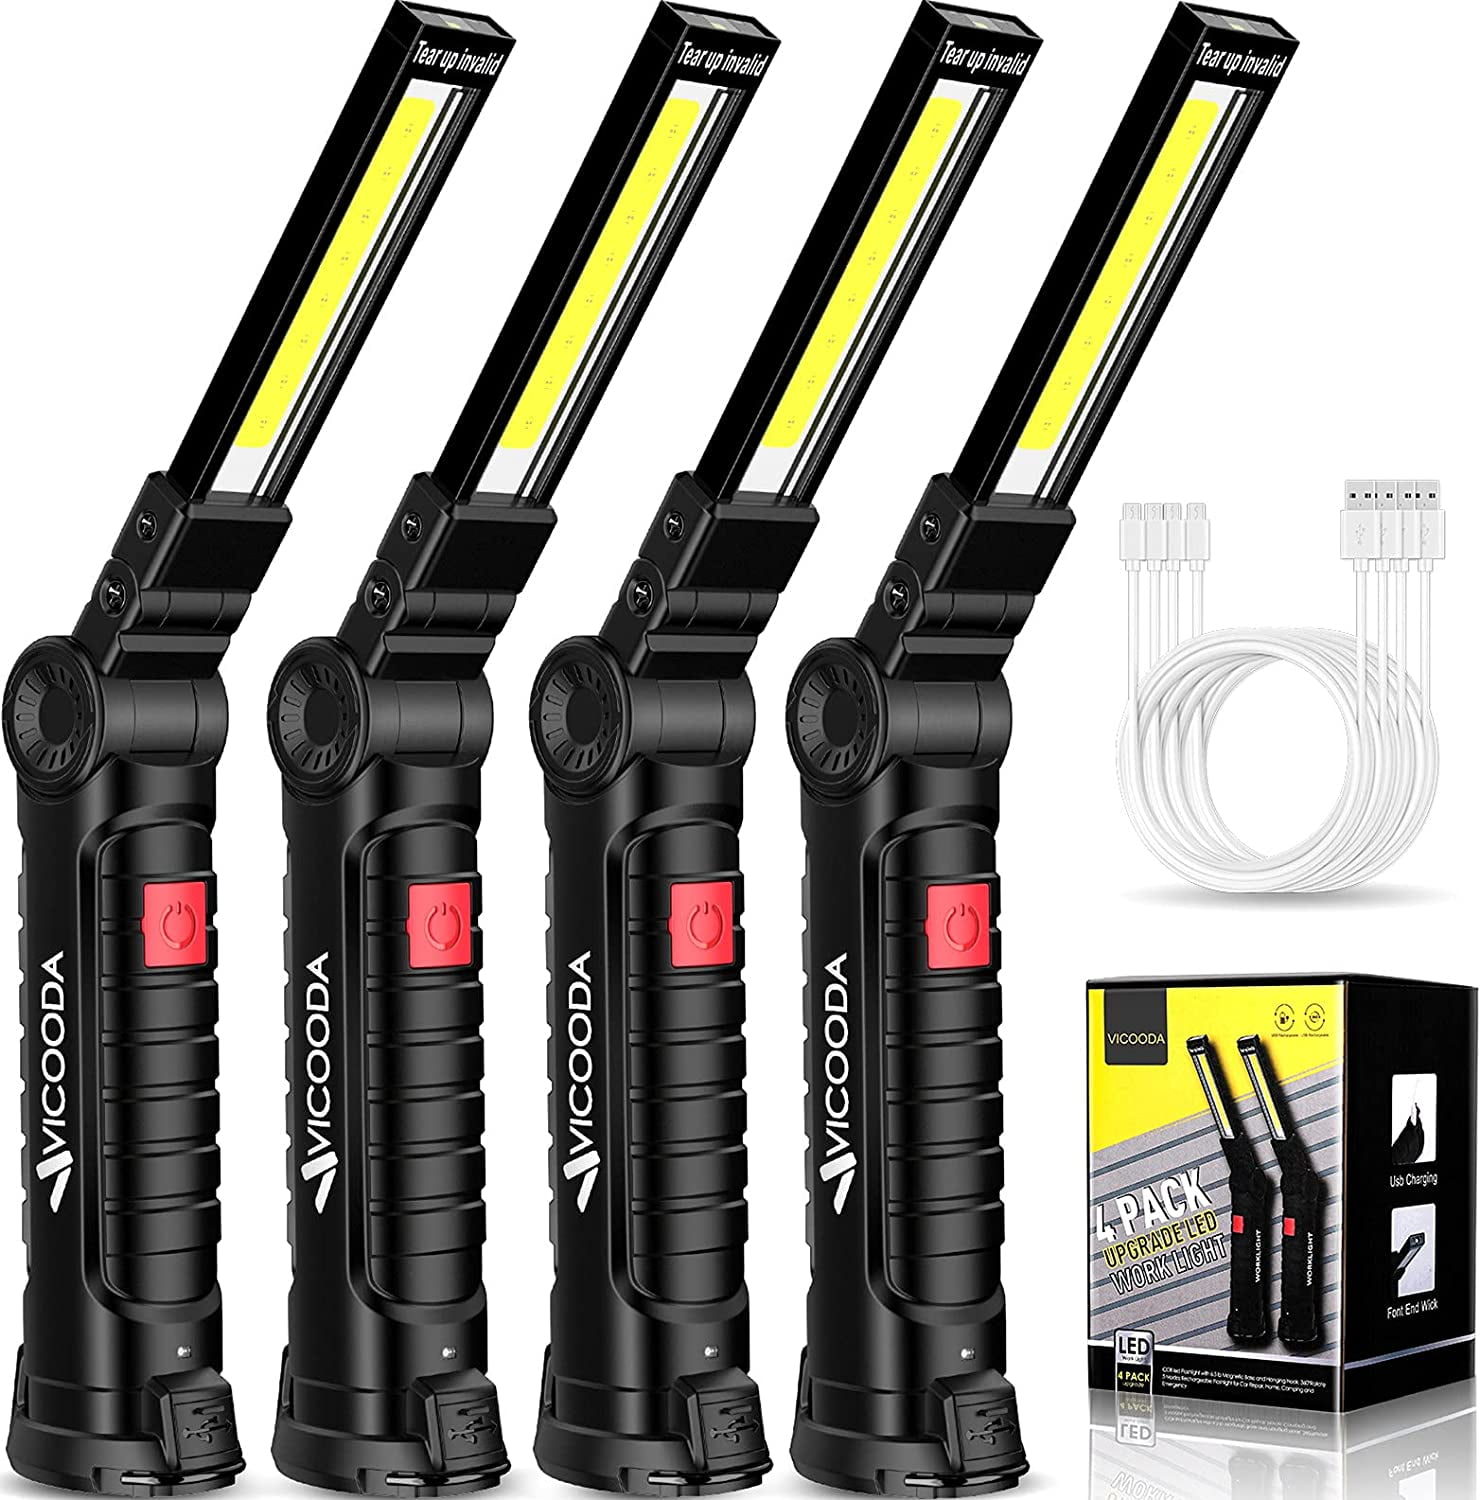 4 Pack LED Work Light,Rechargeable Magnetic Base Light for Reading,Camping,Garage,Car Engines Repair and All Tight Spots - Walmart.com